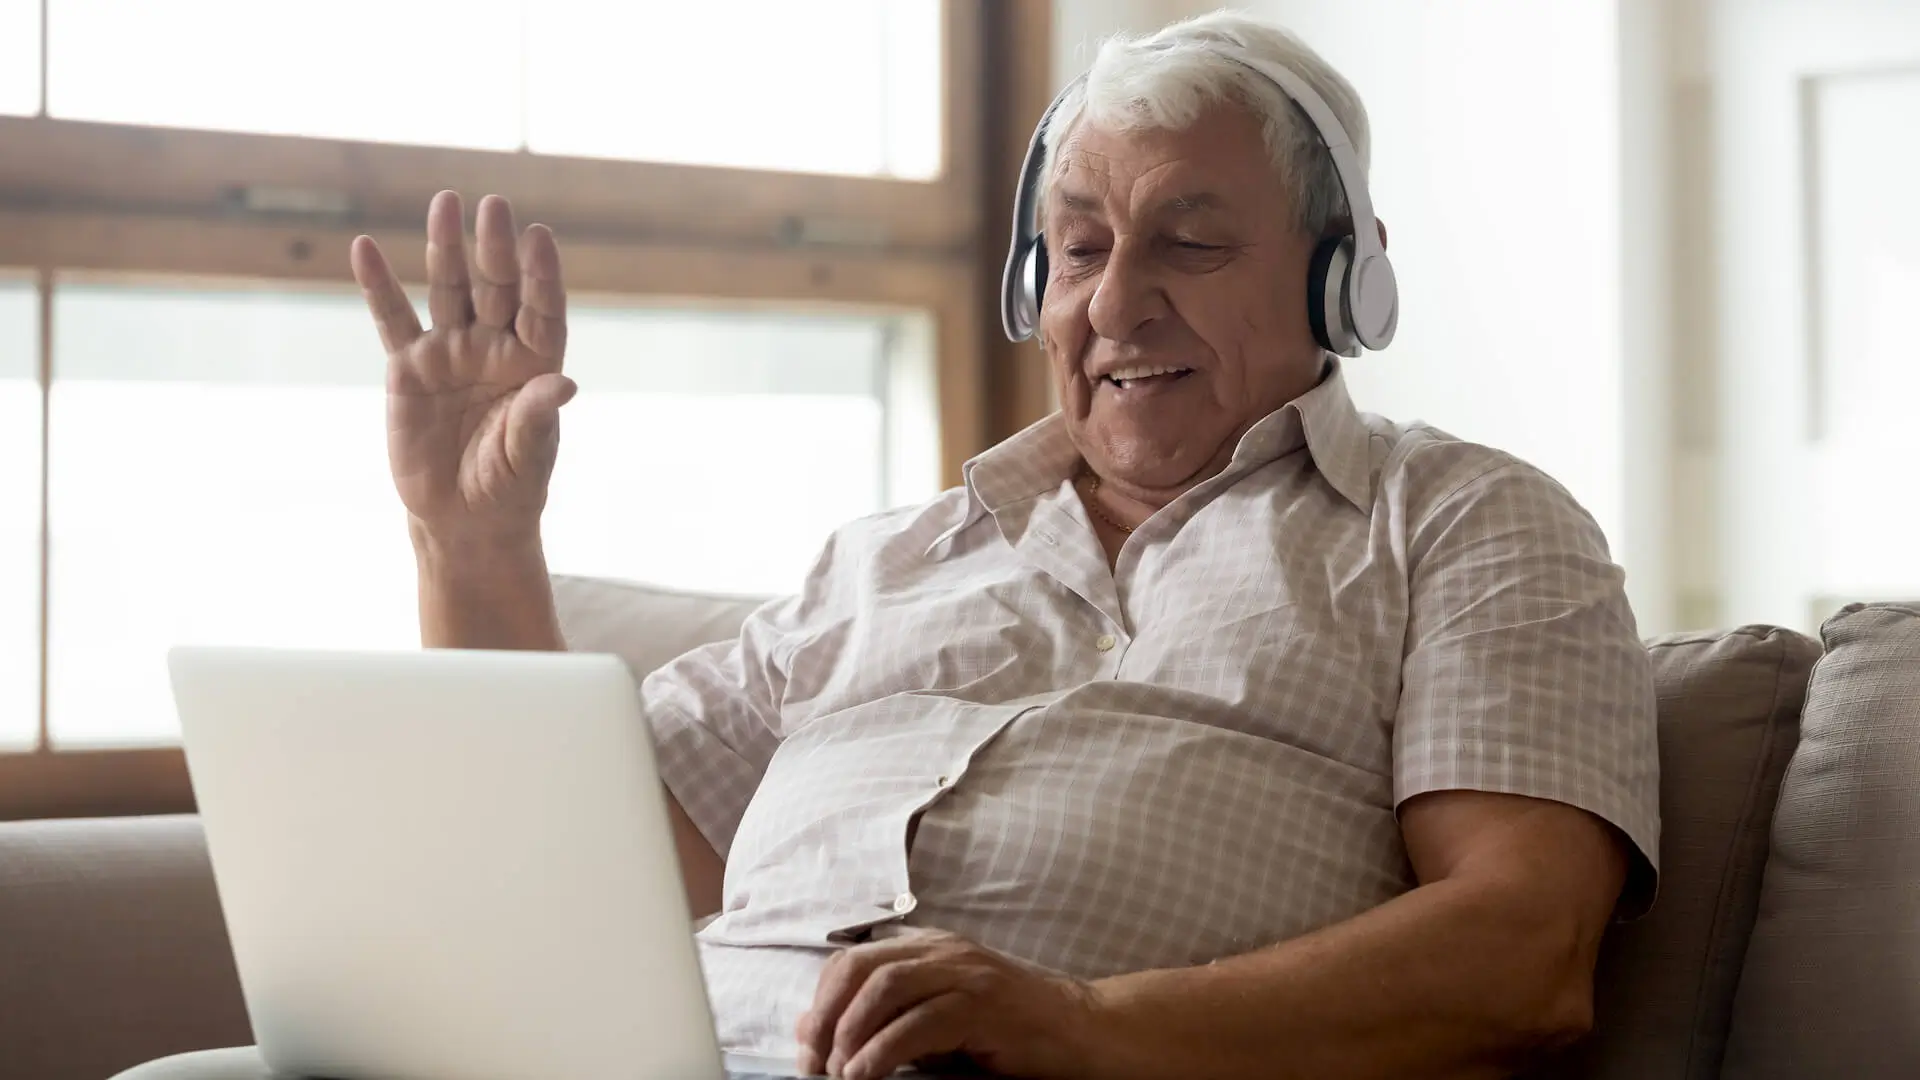 Creative Ways for Seniors to Stay Connected During Social Distancing 